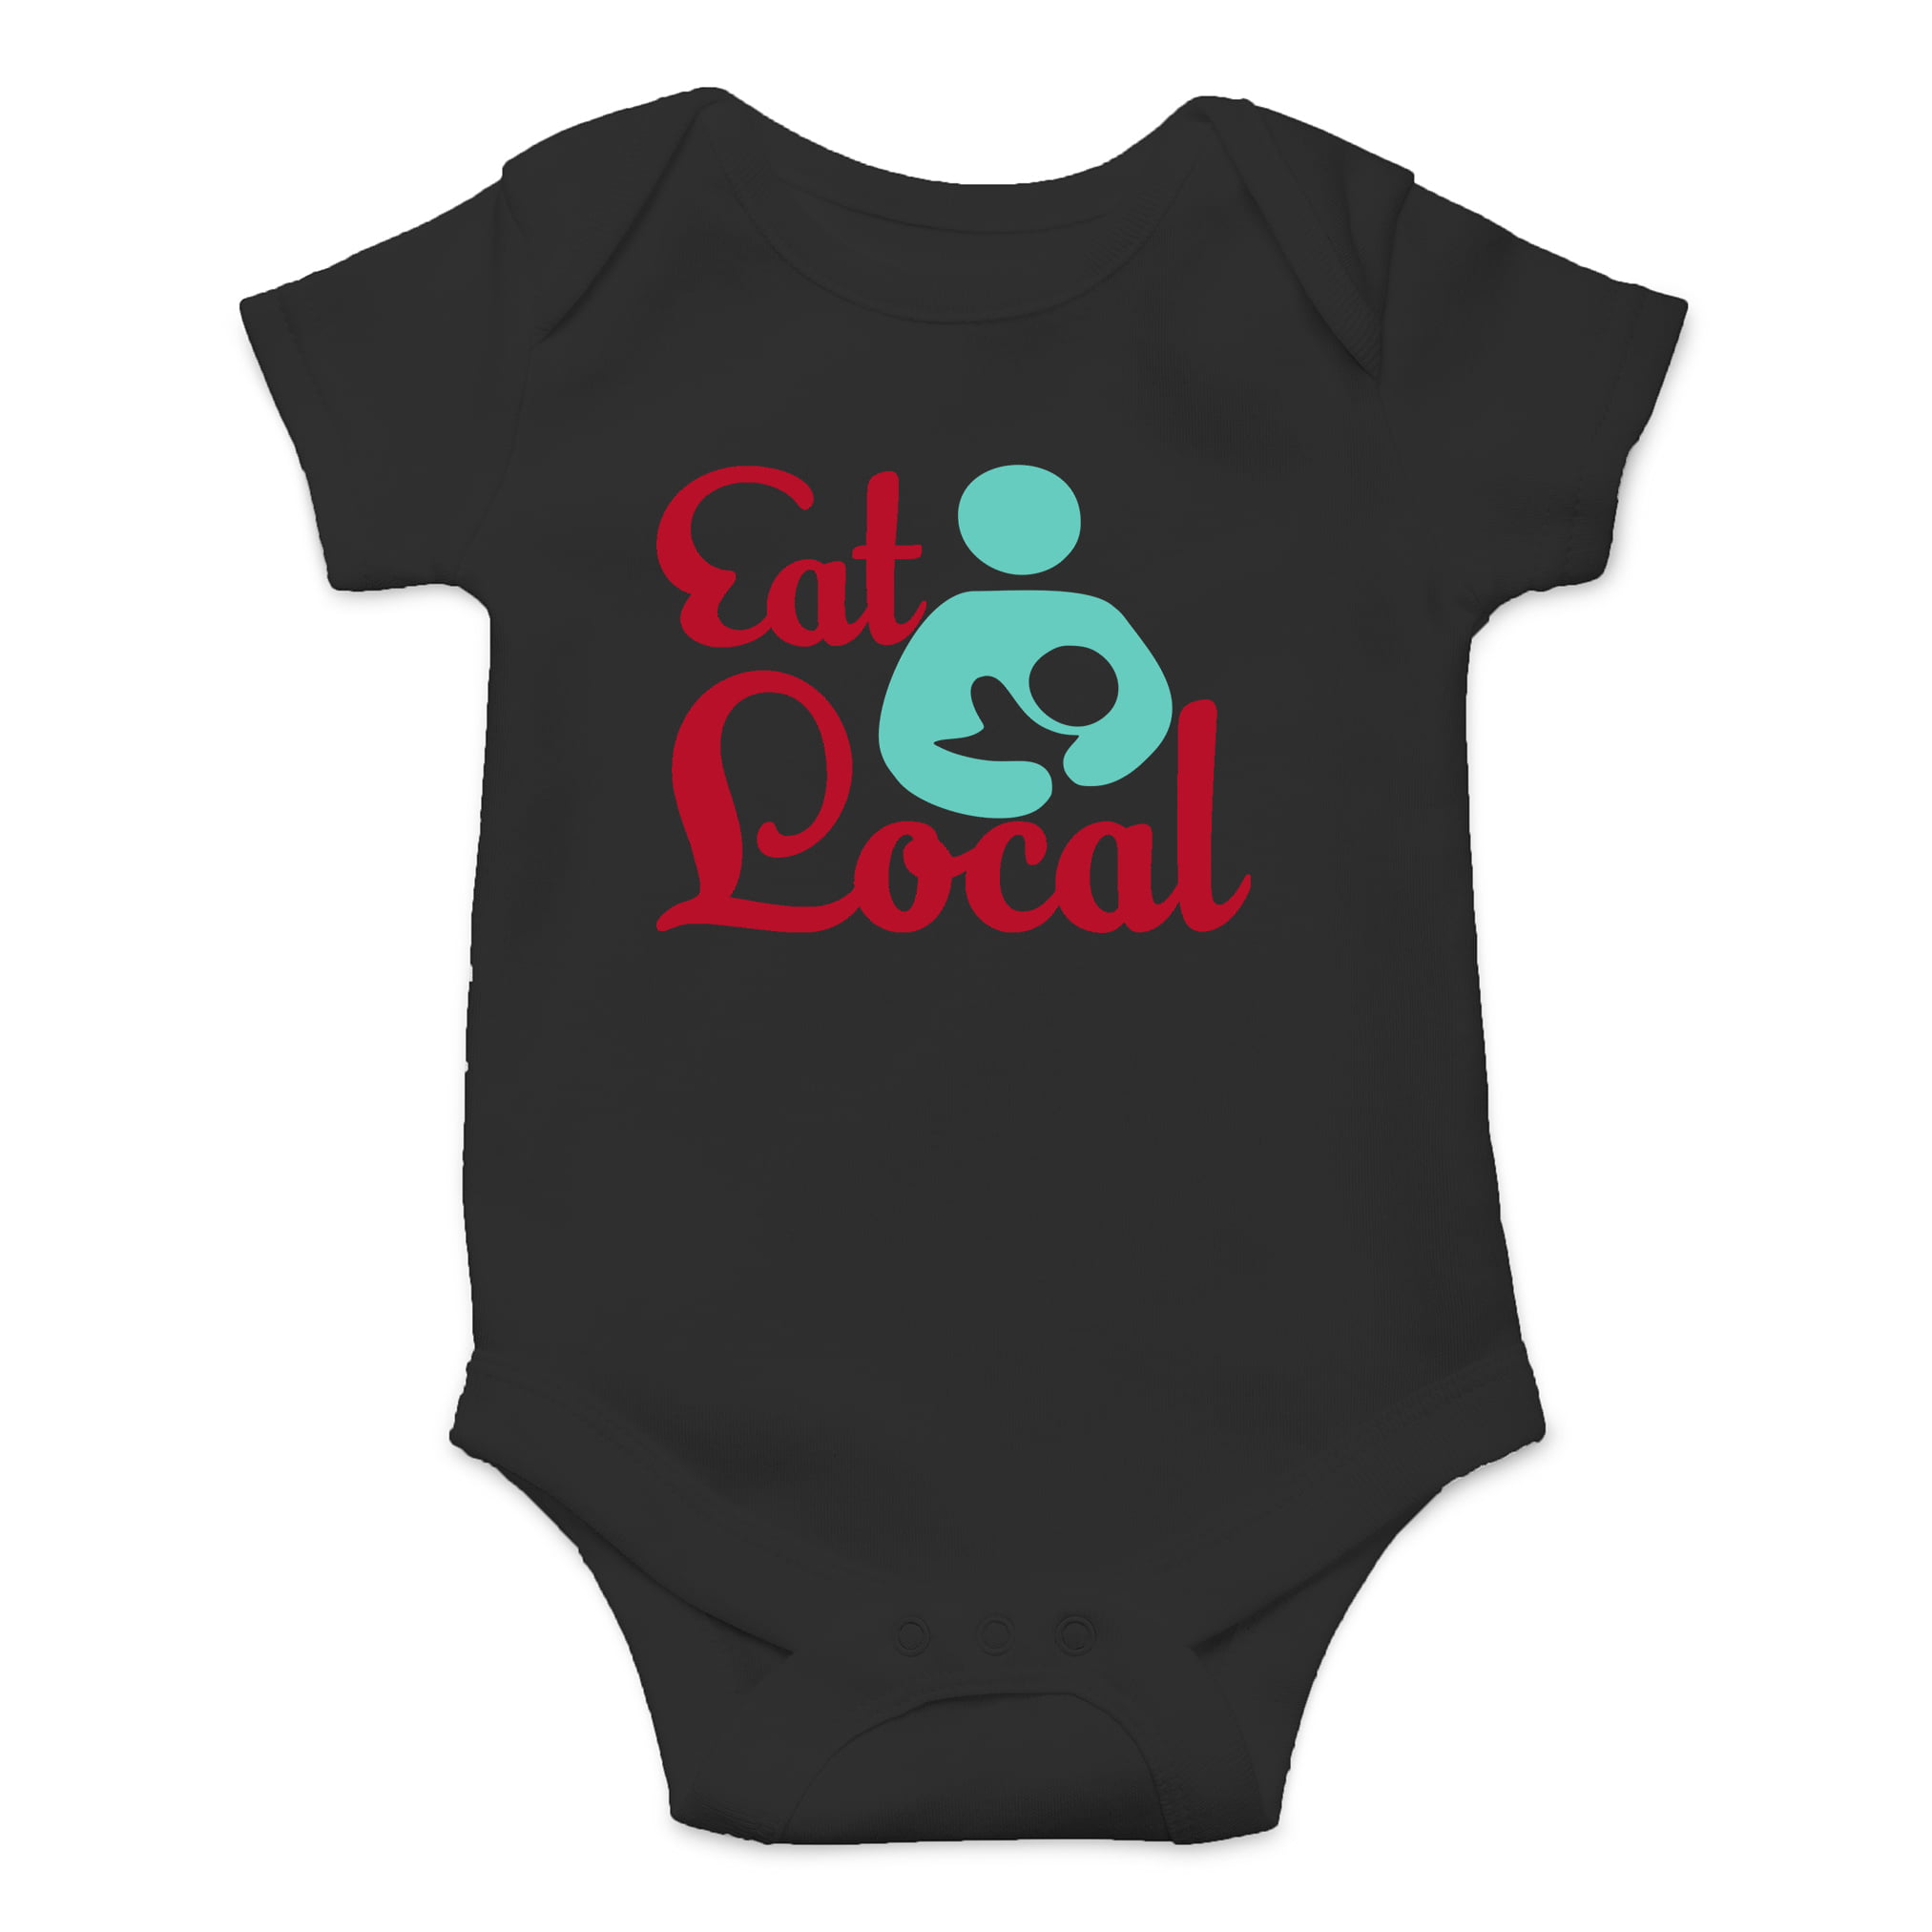 Eat Local - Breastfeeding Support - Cute Lactation - Cute One-Piece Infant  Baby Bodysuit